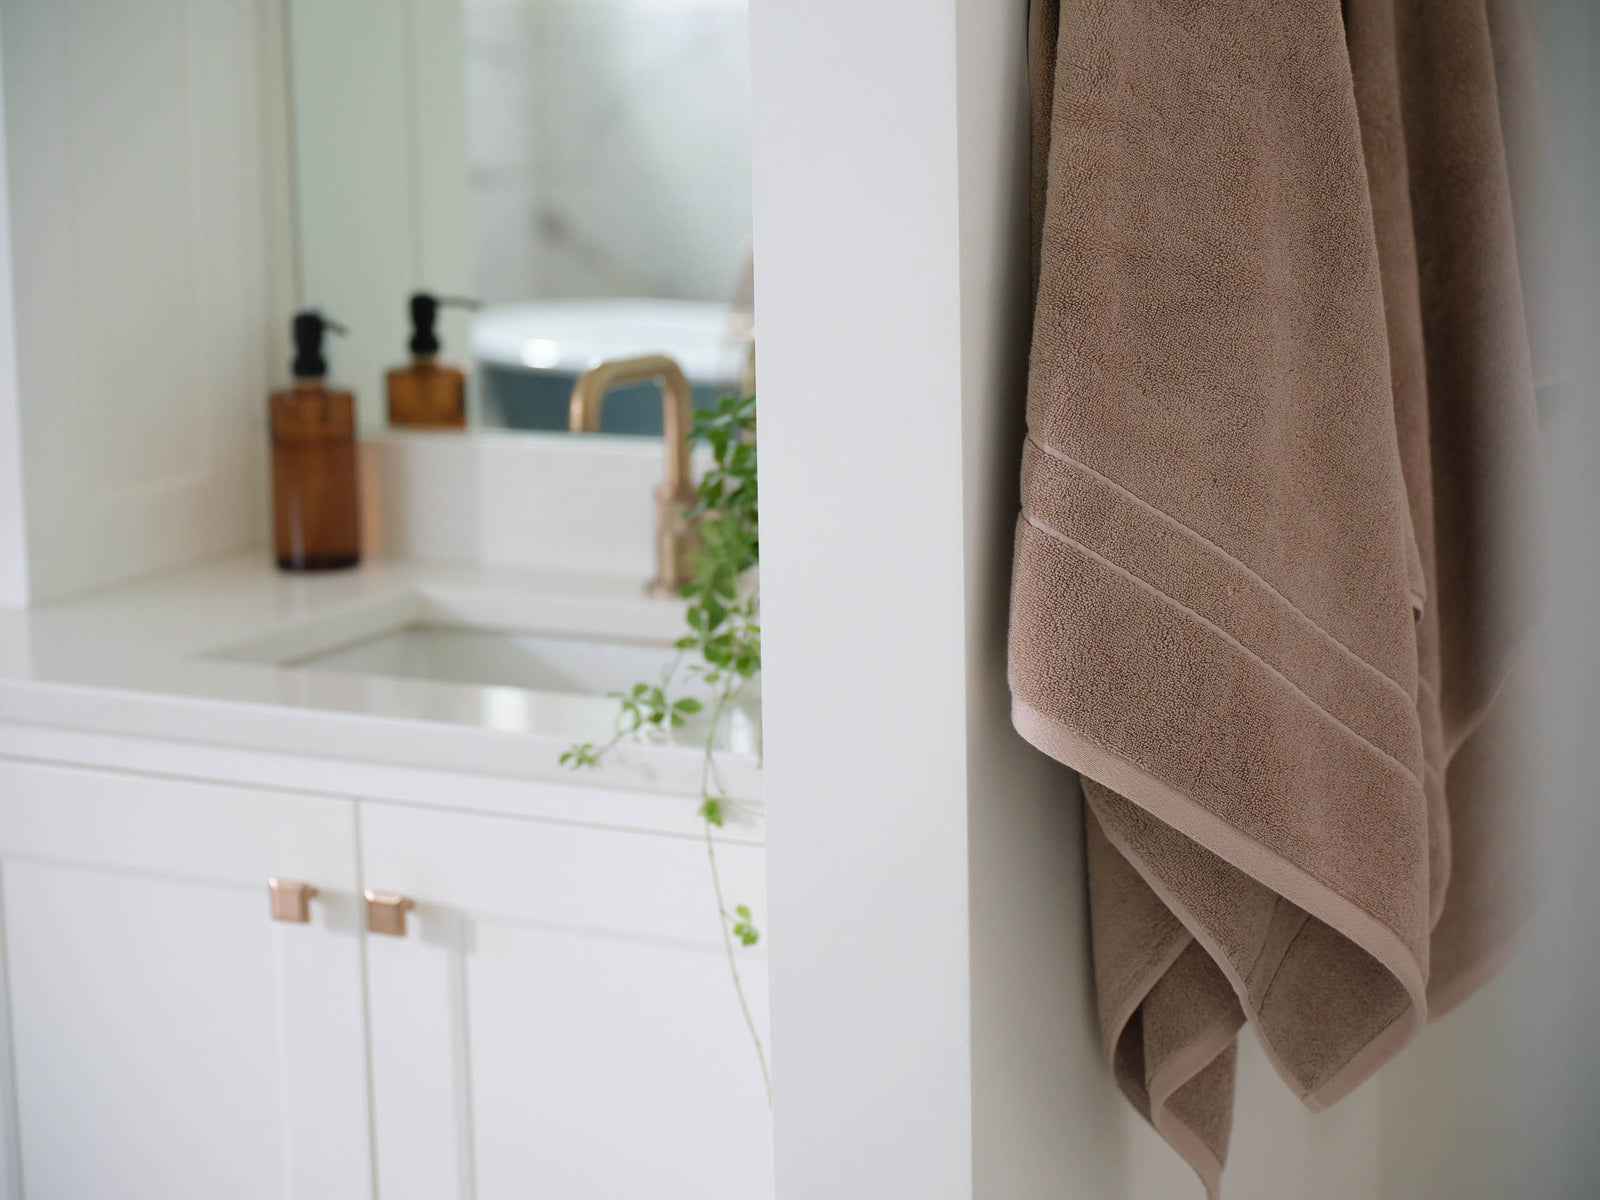 Premium Plush Bath Towel in the color Sand. The towels are hung from a towel hook on the wall of a bathroom. 